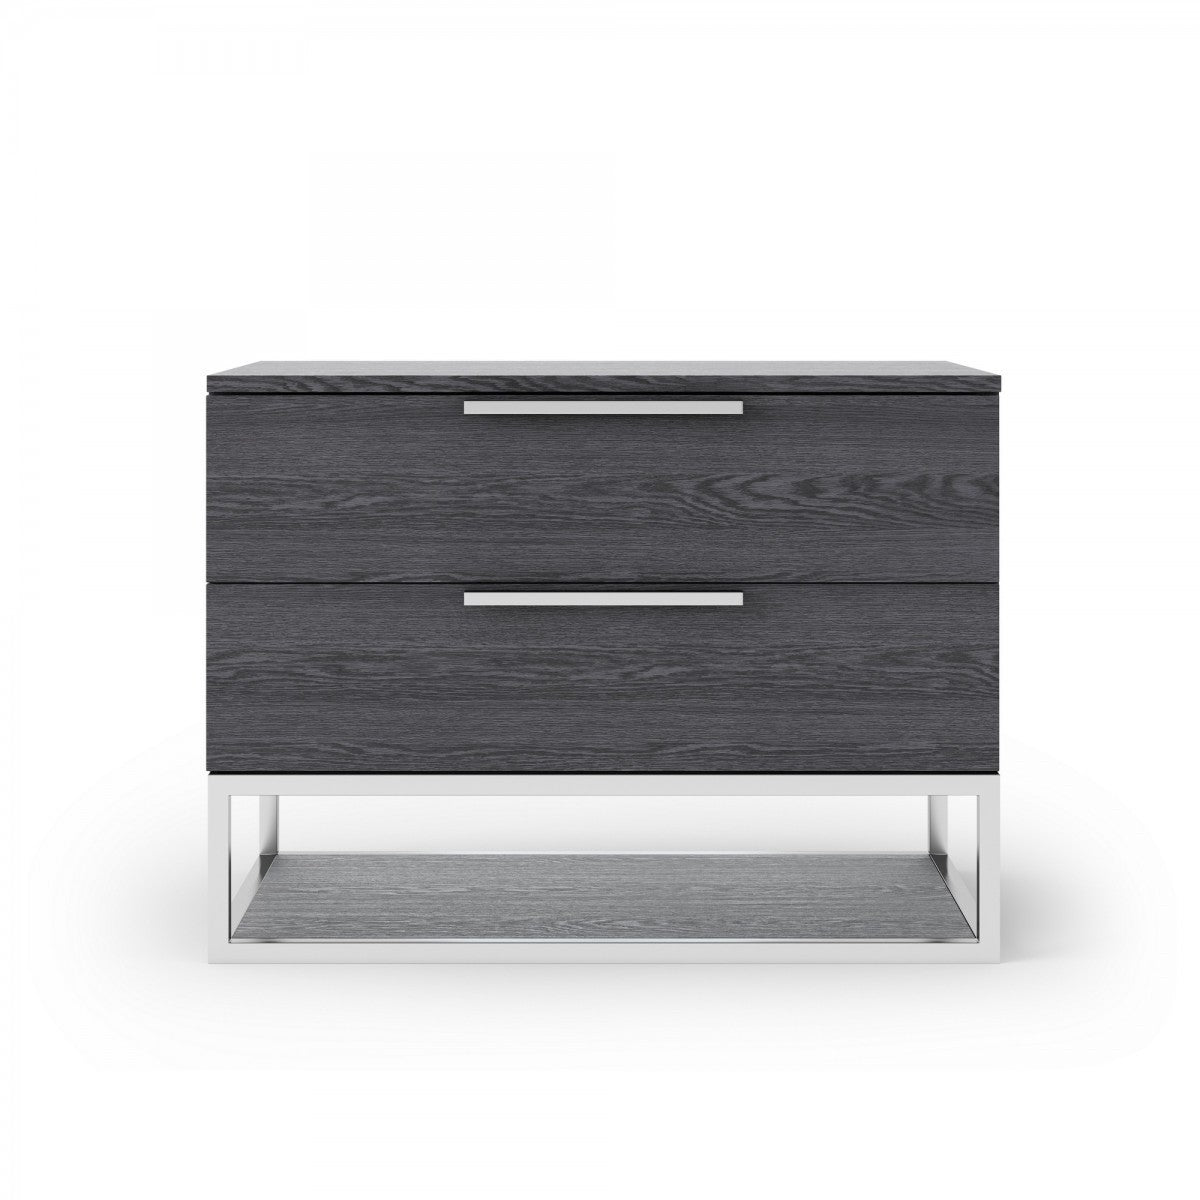 22" Gray Two Drawers Solid Wood Nightstand